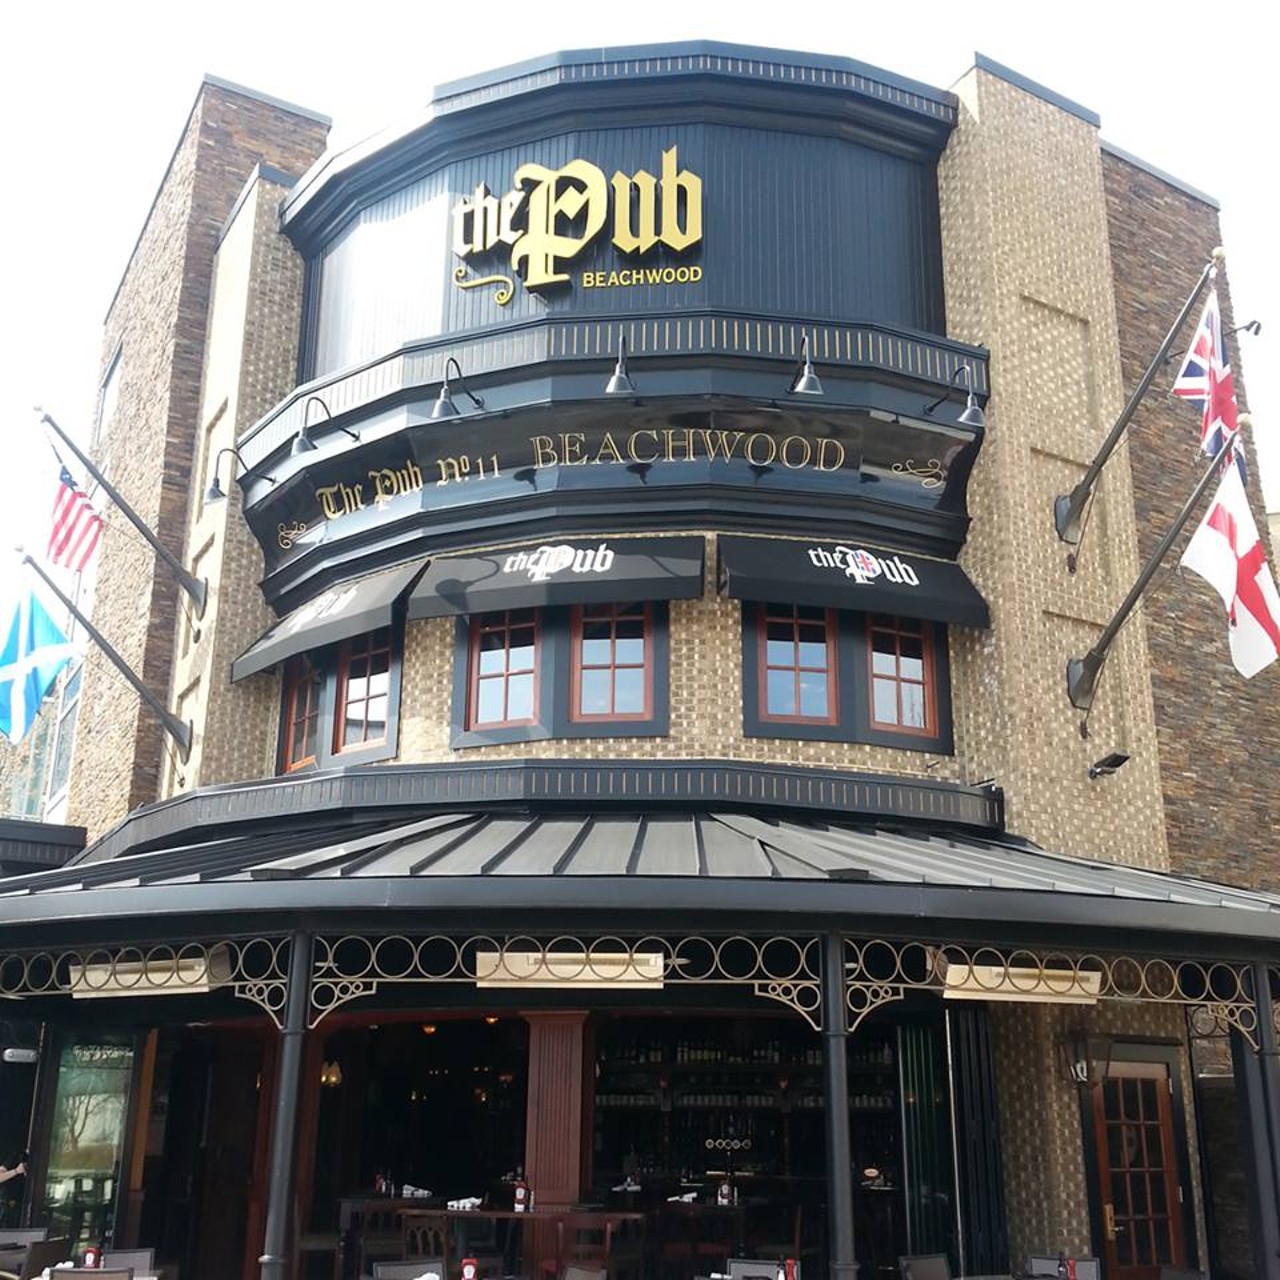 The Pub in Beachwood is so well themed it could be placed on any corner in London. Grab some fish and chips from this British beauty.